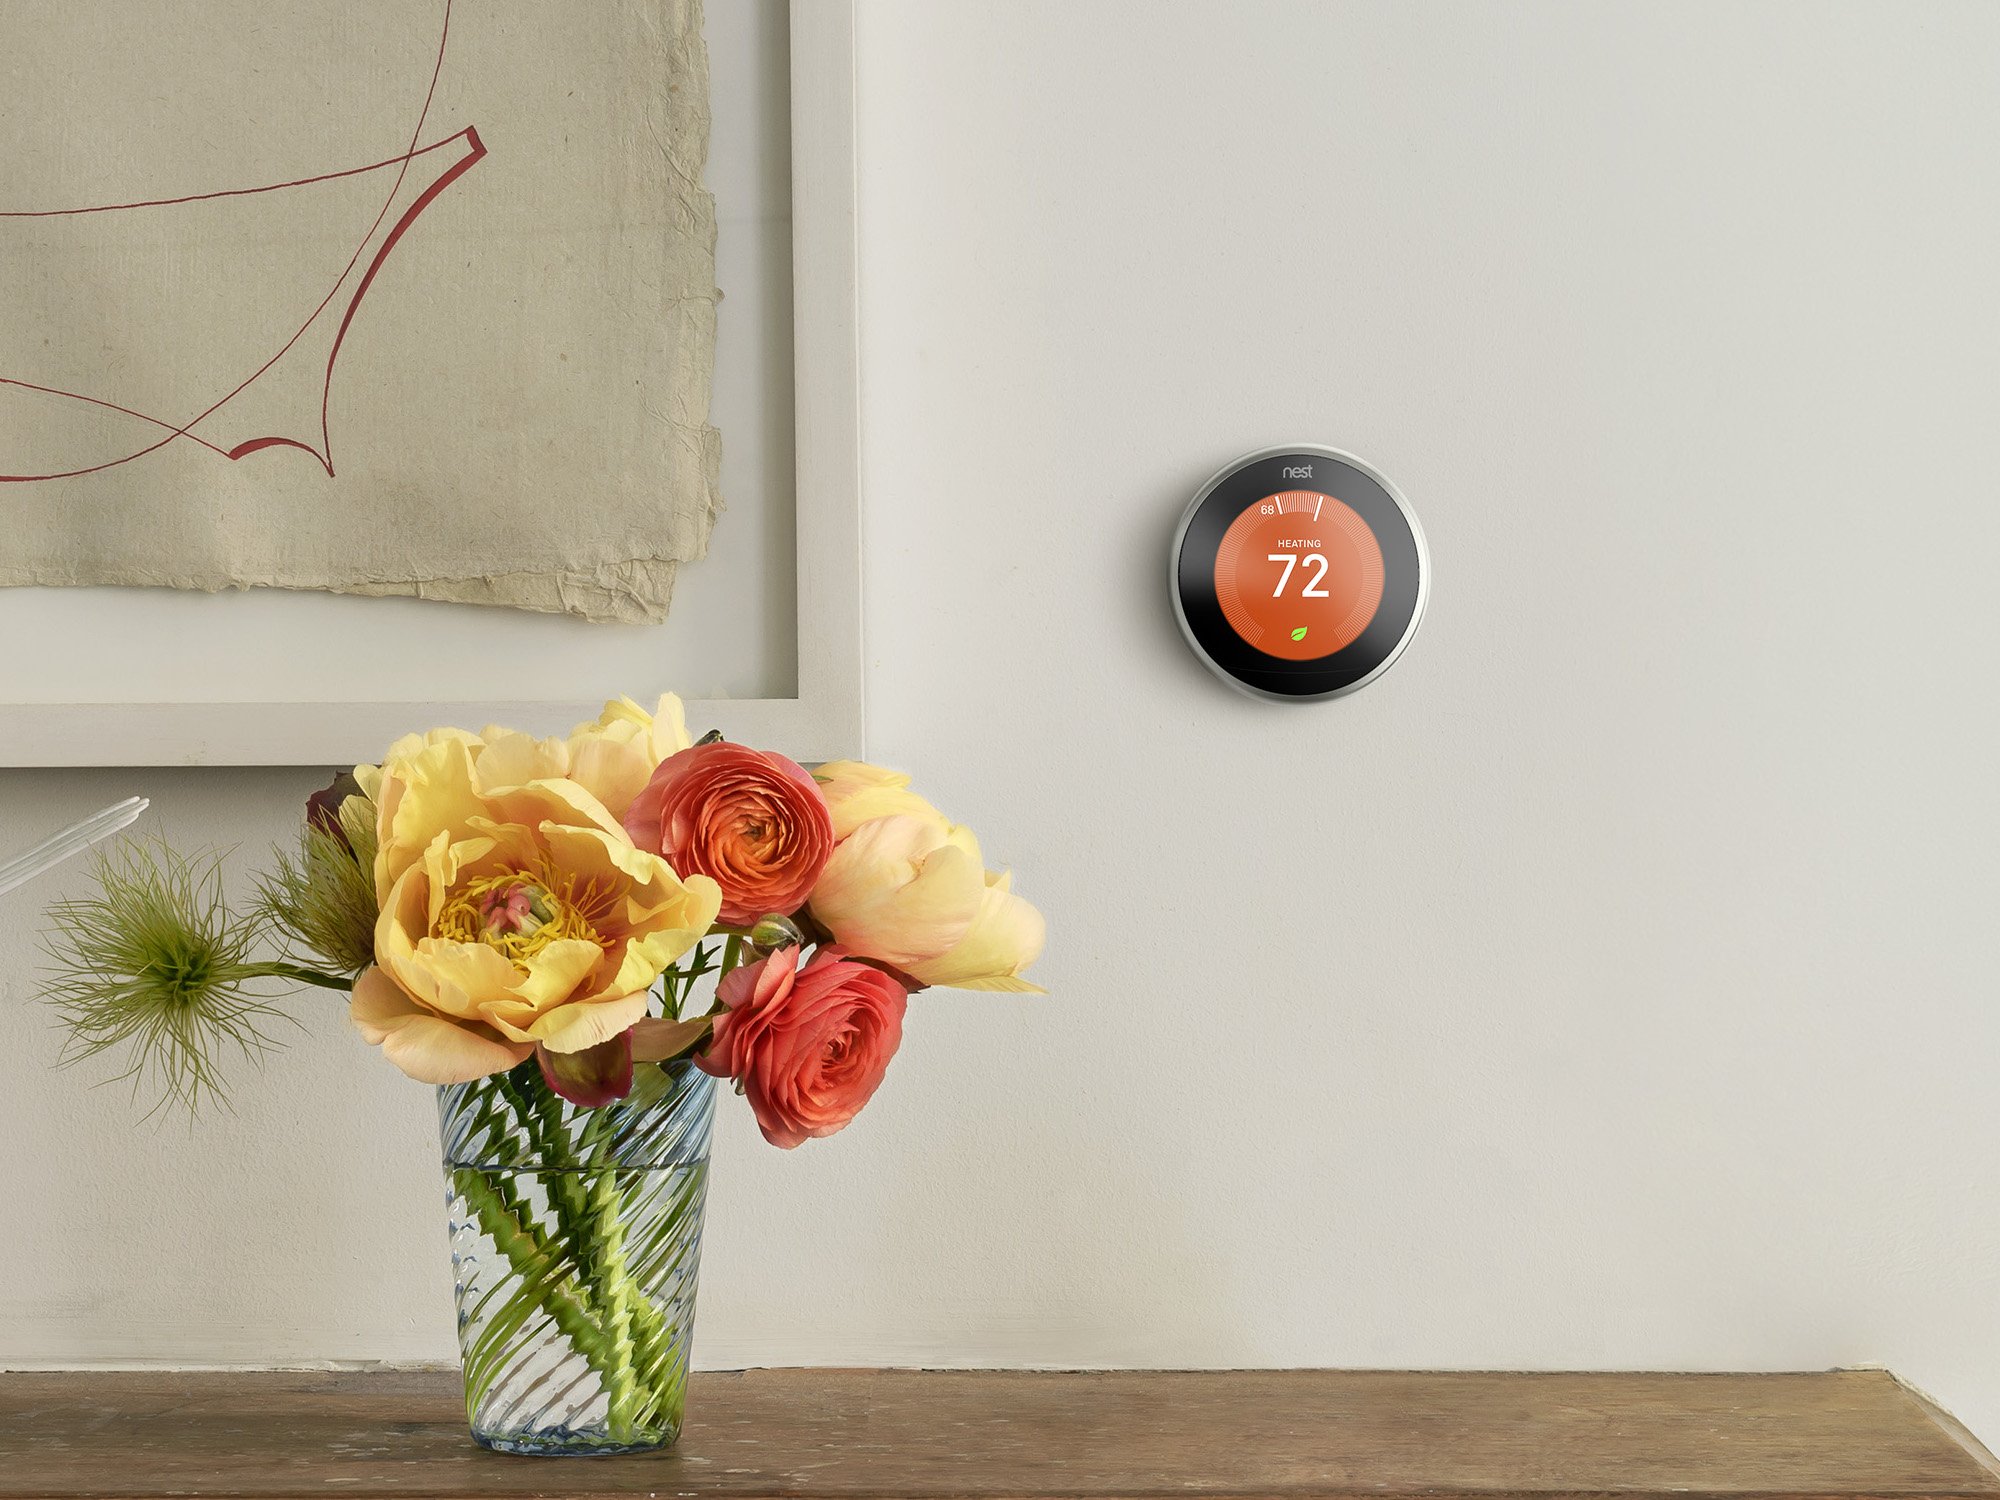 Lifestyle photo of a Nest Learning Thermostat on the wall of a home